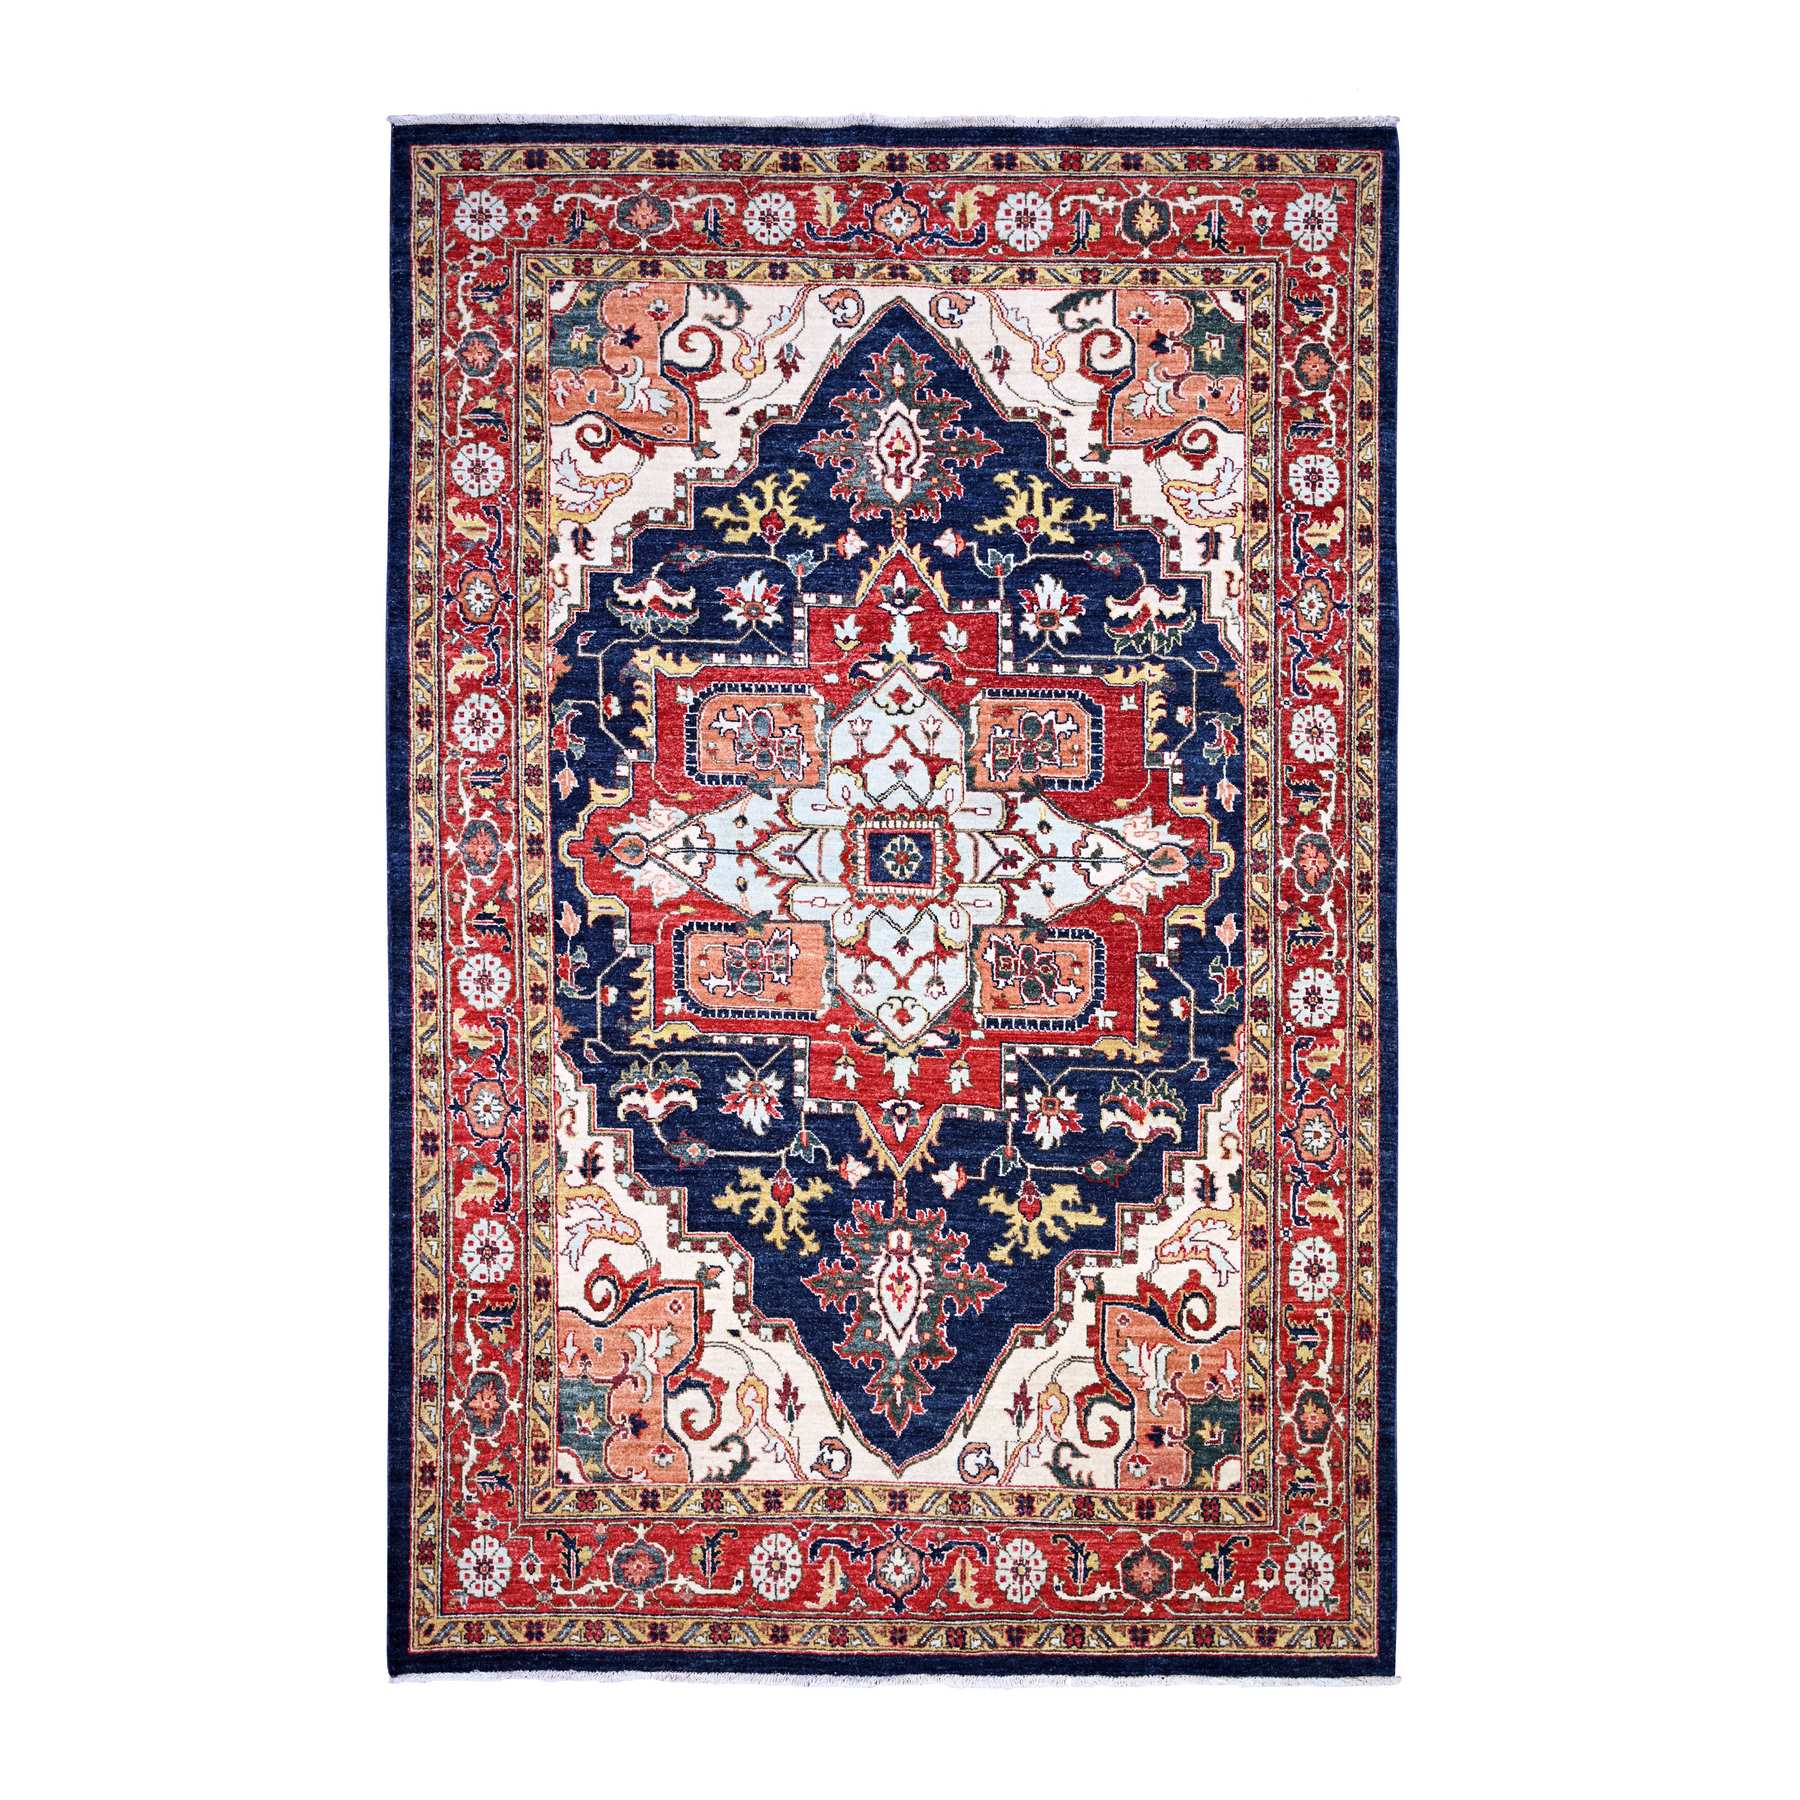  Wool Hand-Knotted Area Rug 5'7